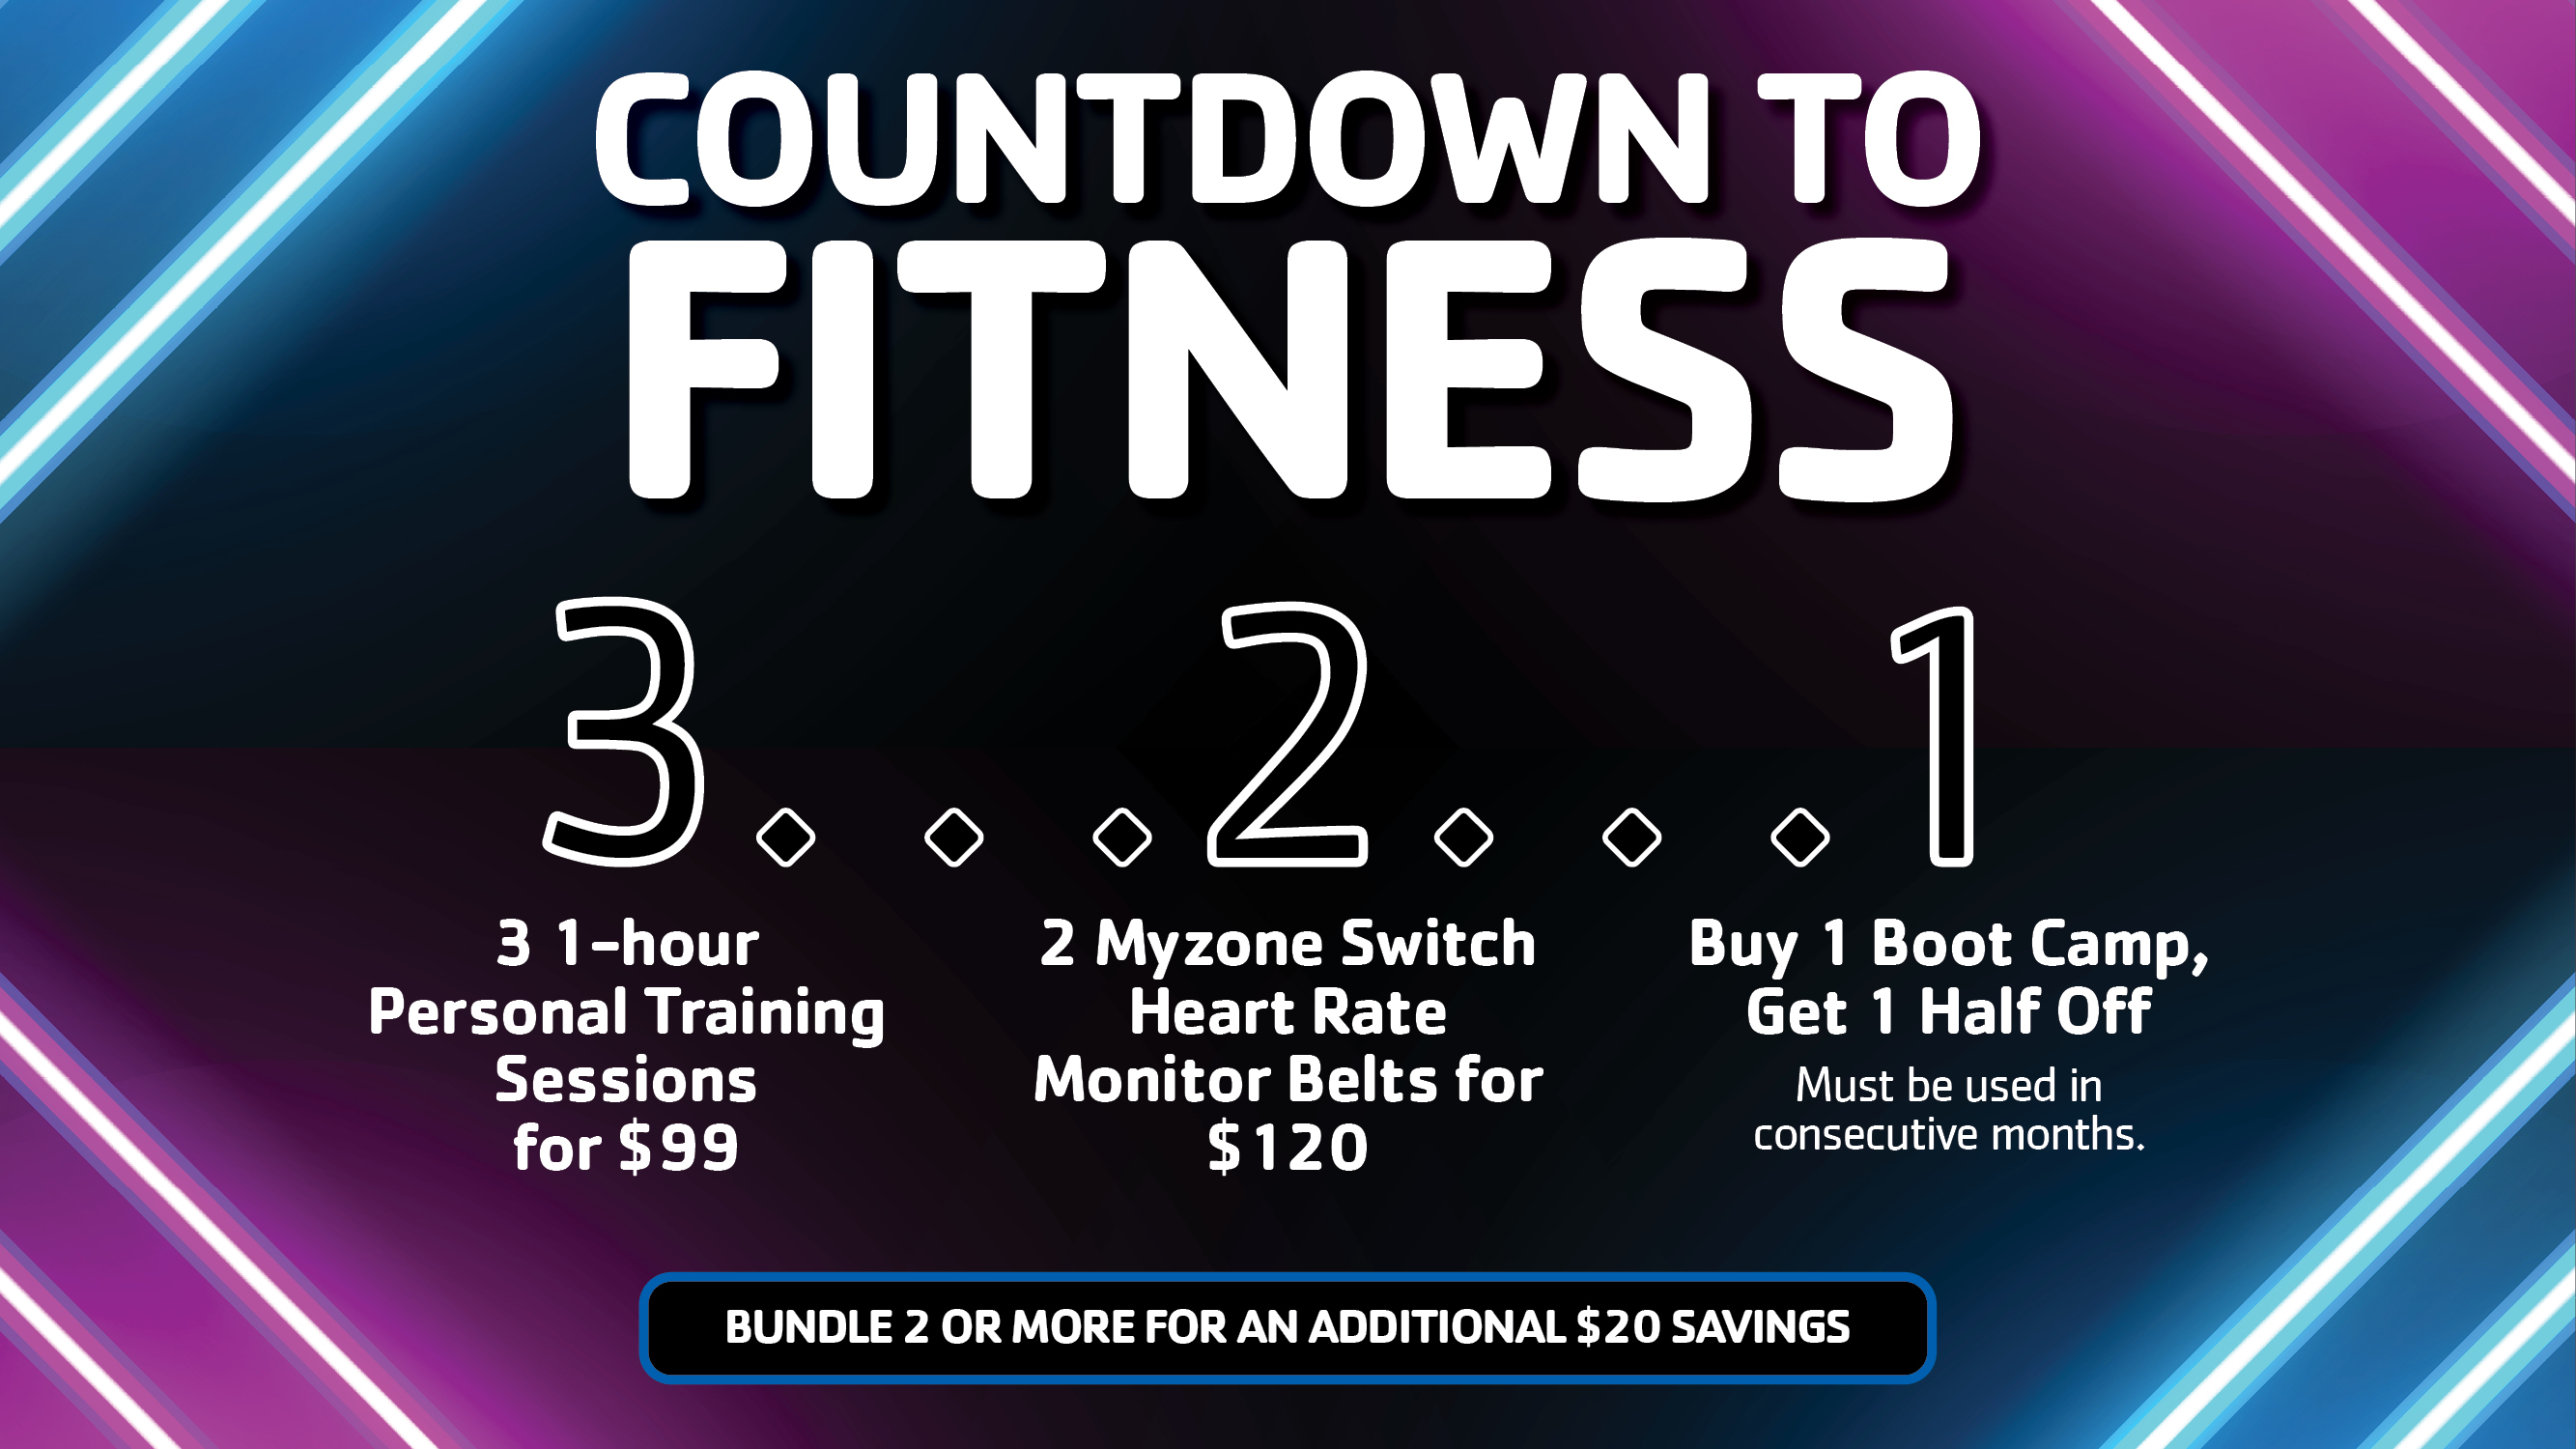 Countdown to Fitness